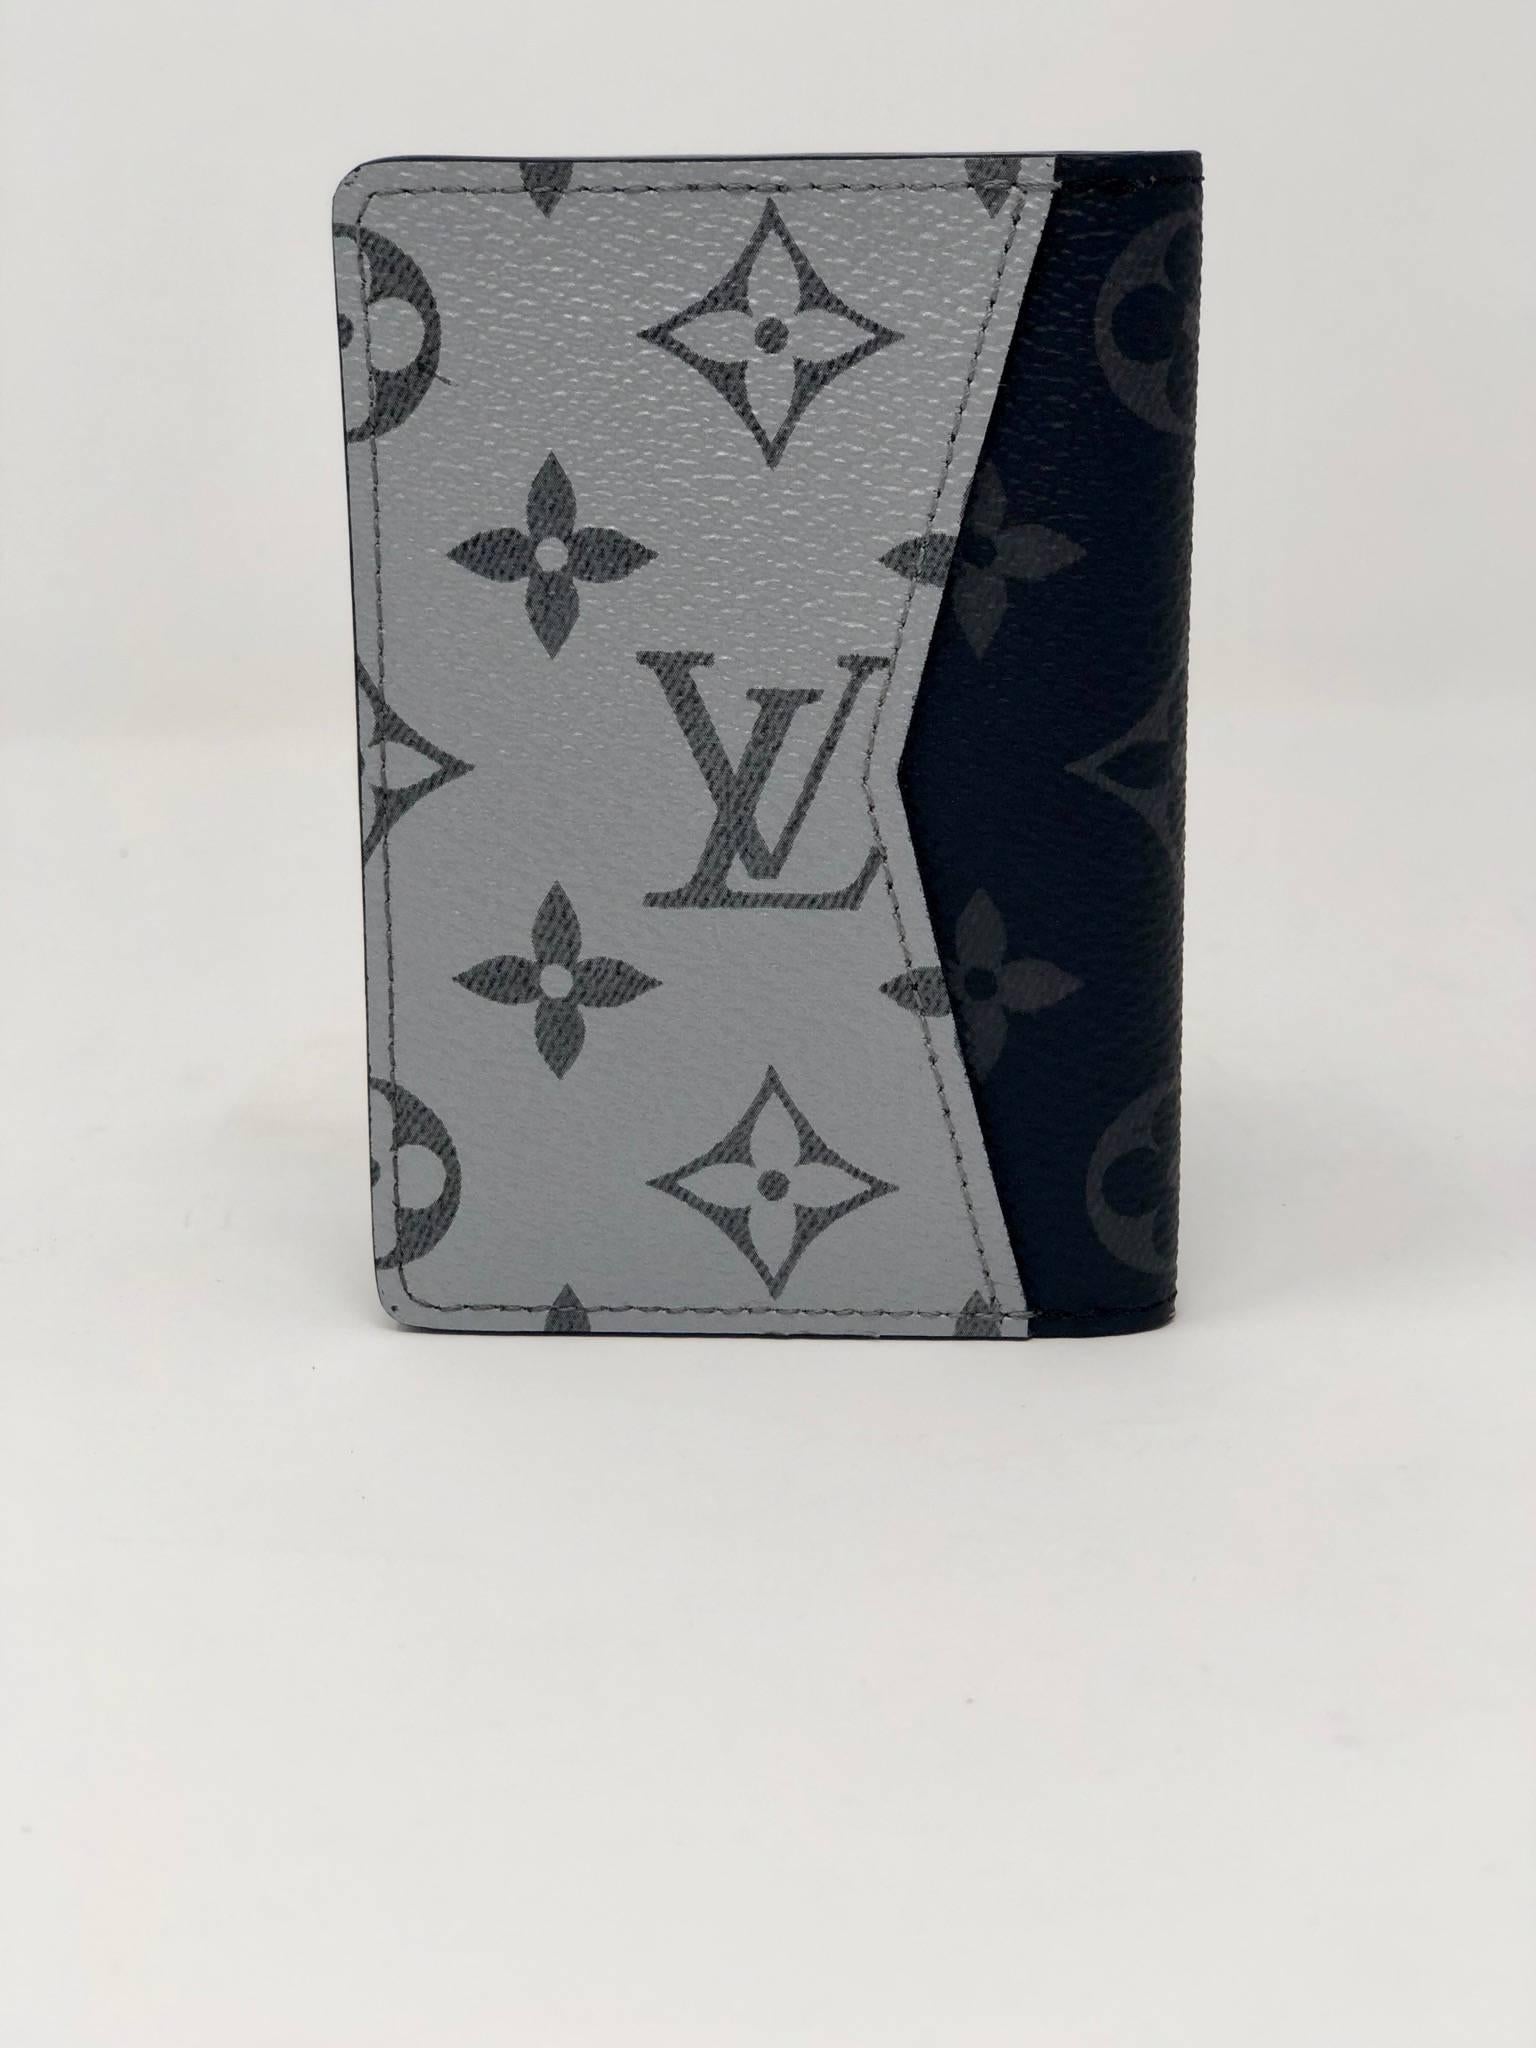 Sold out LV Silver Eclipse Pocket Organizer Wallet. Brand new condition with dust cover and box. Kim Jones collection. 3 credit card slots, 5 interior pockets, 1 external pocket. 